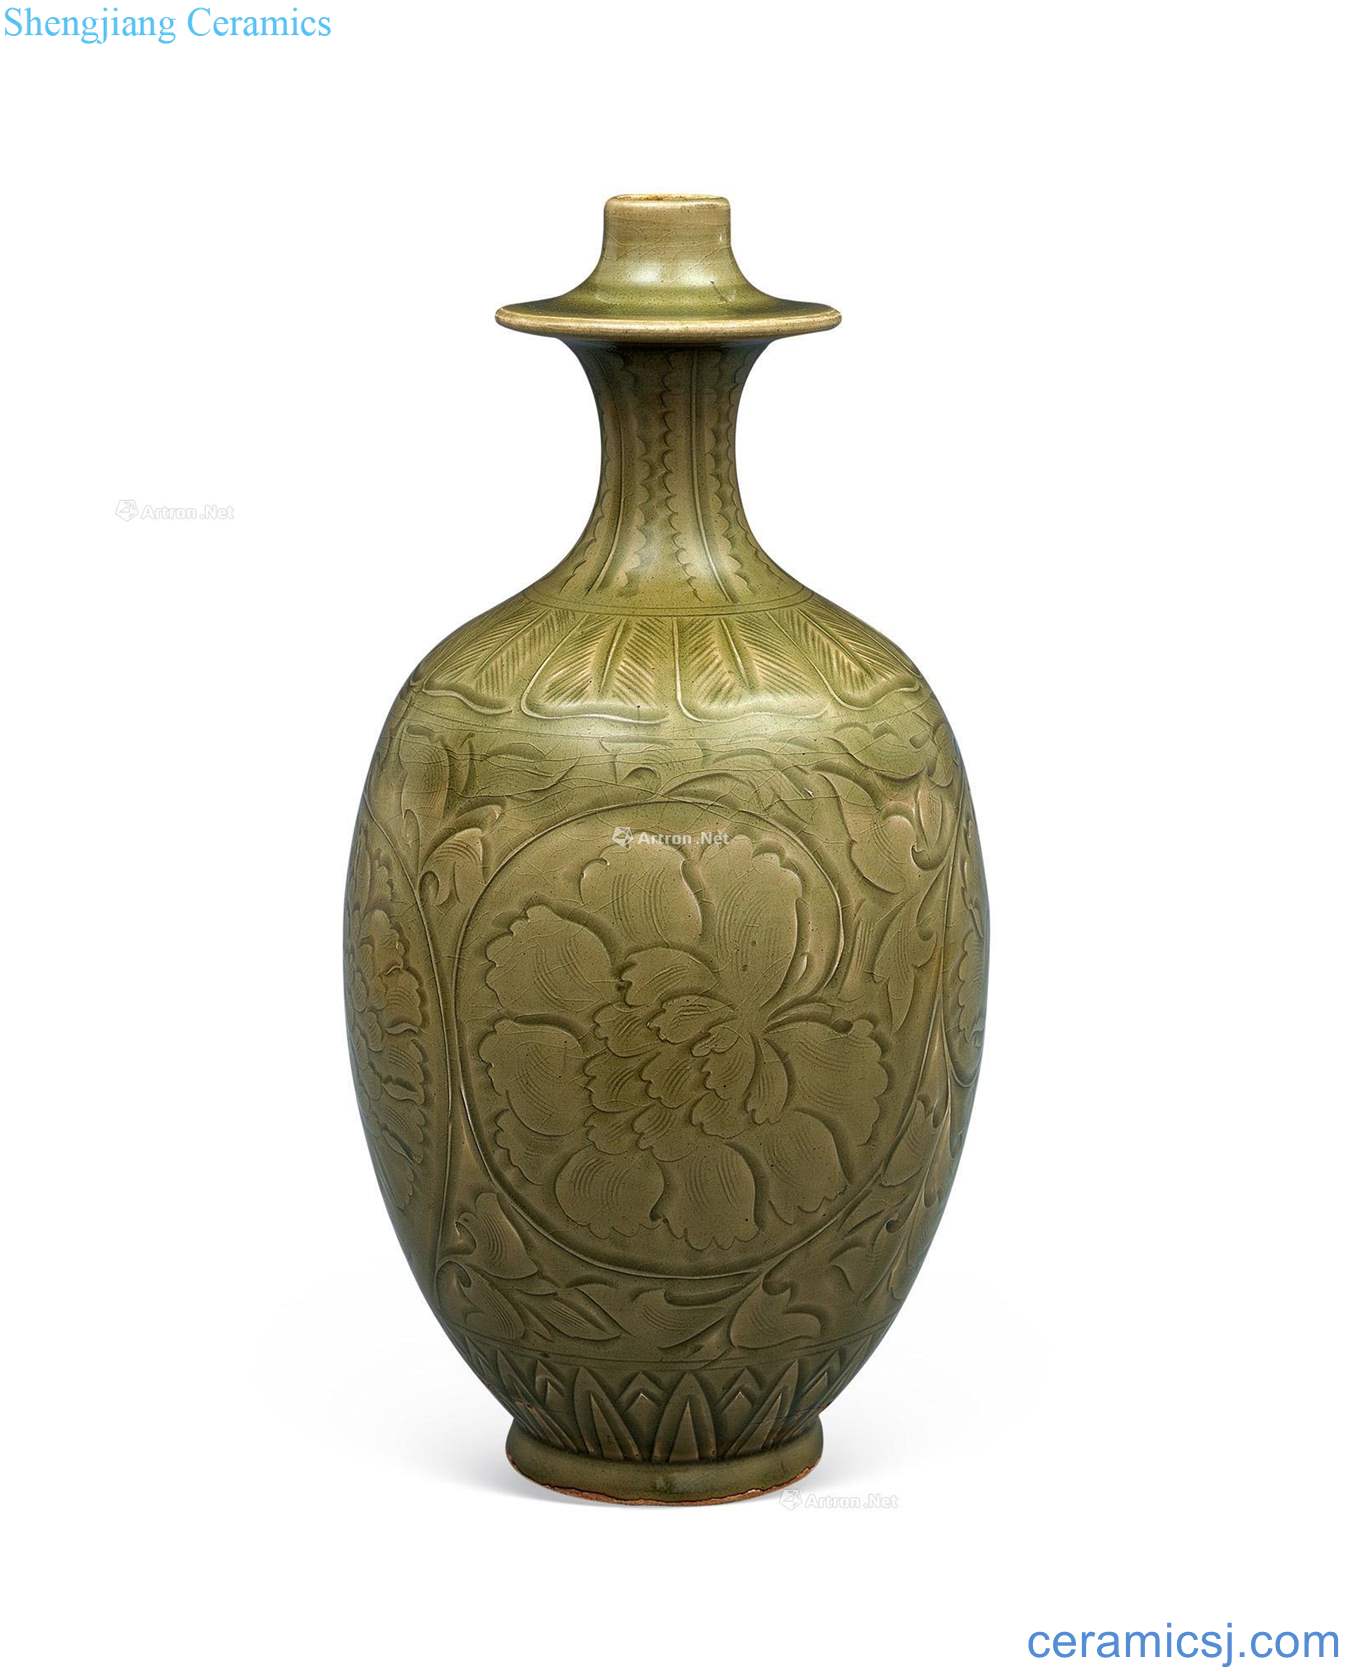 The song dynasty Yao state kiln hand-cut net bottles